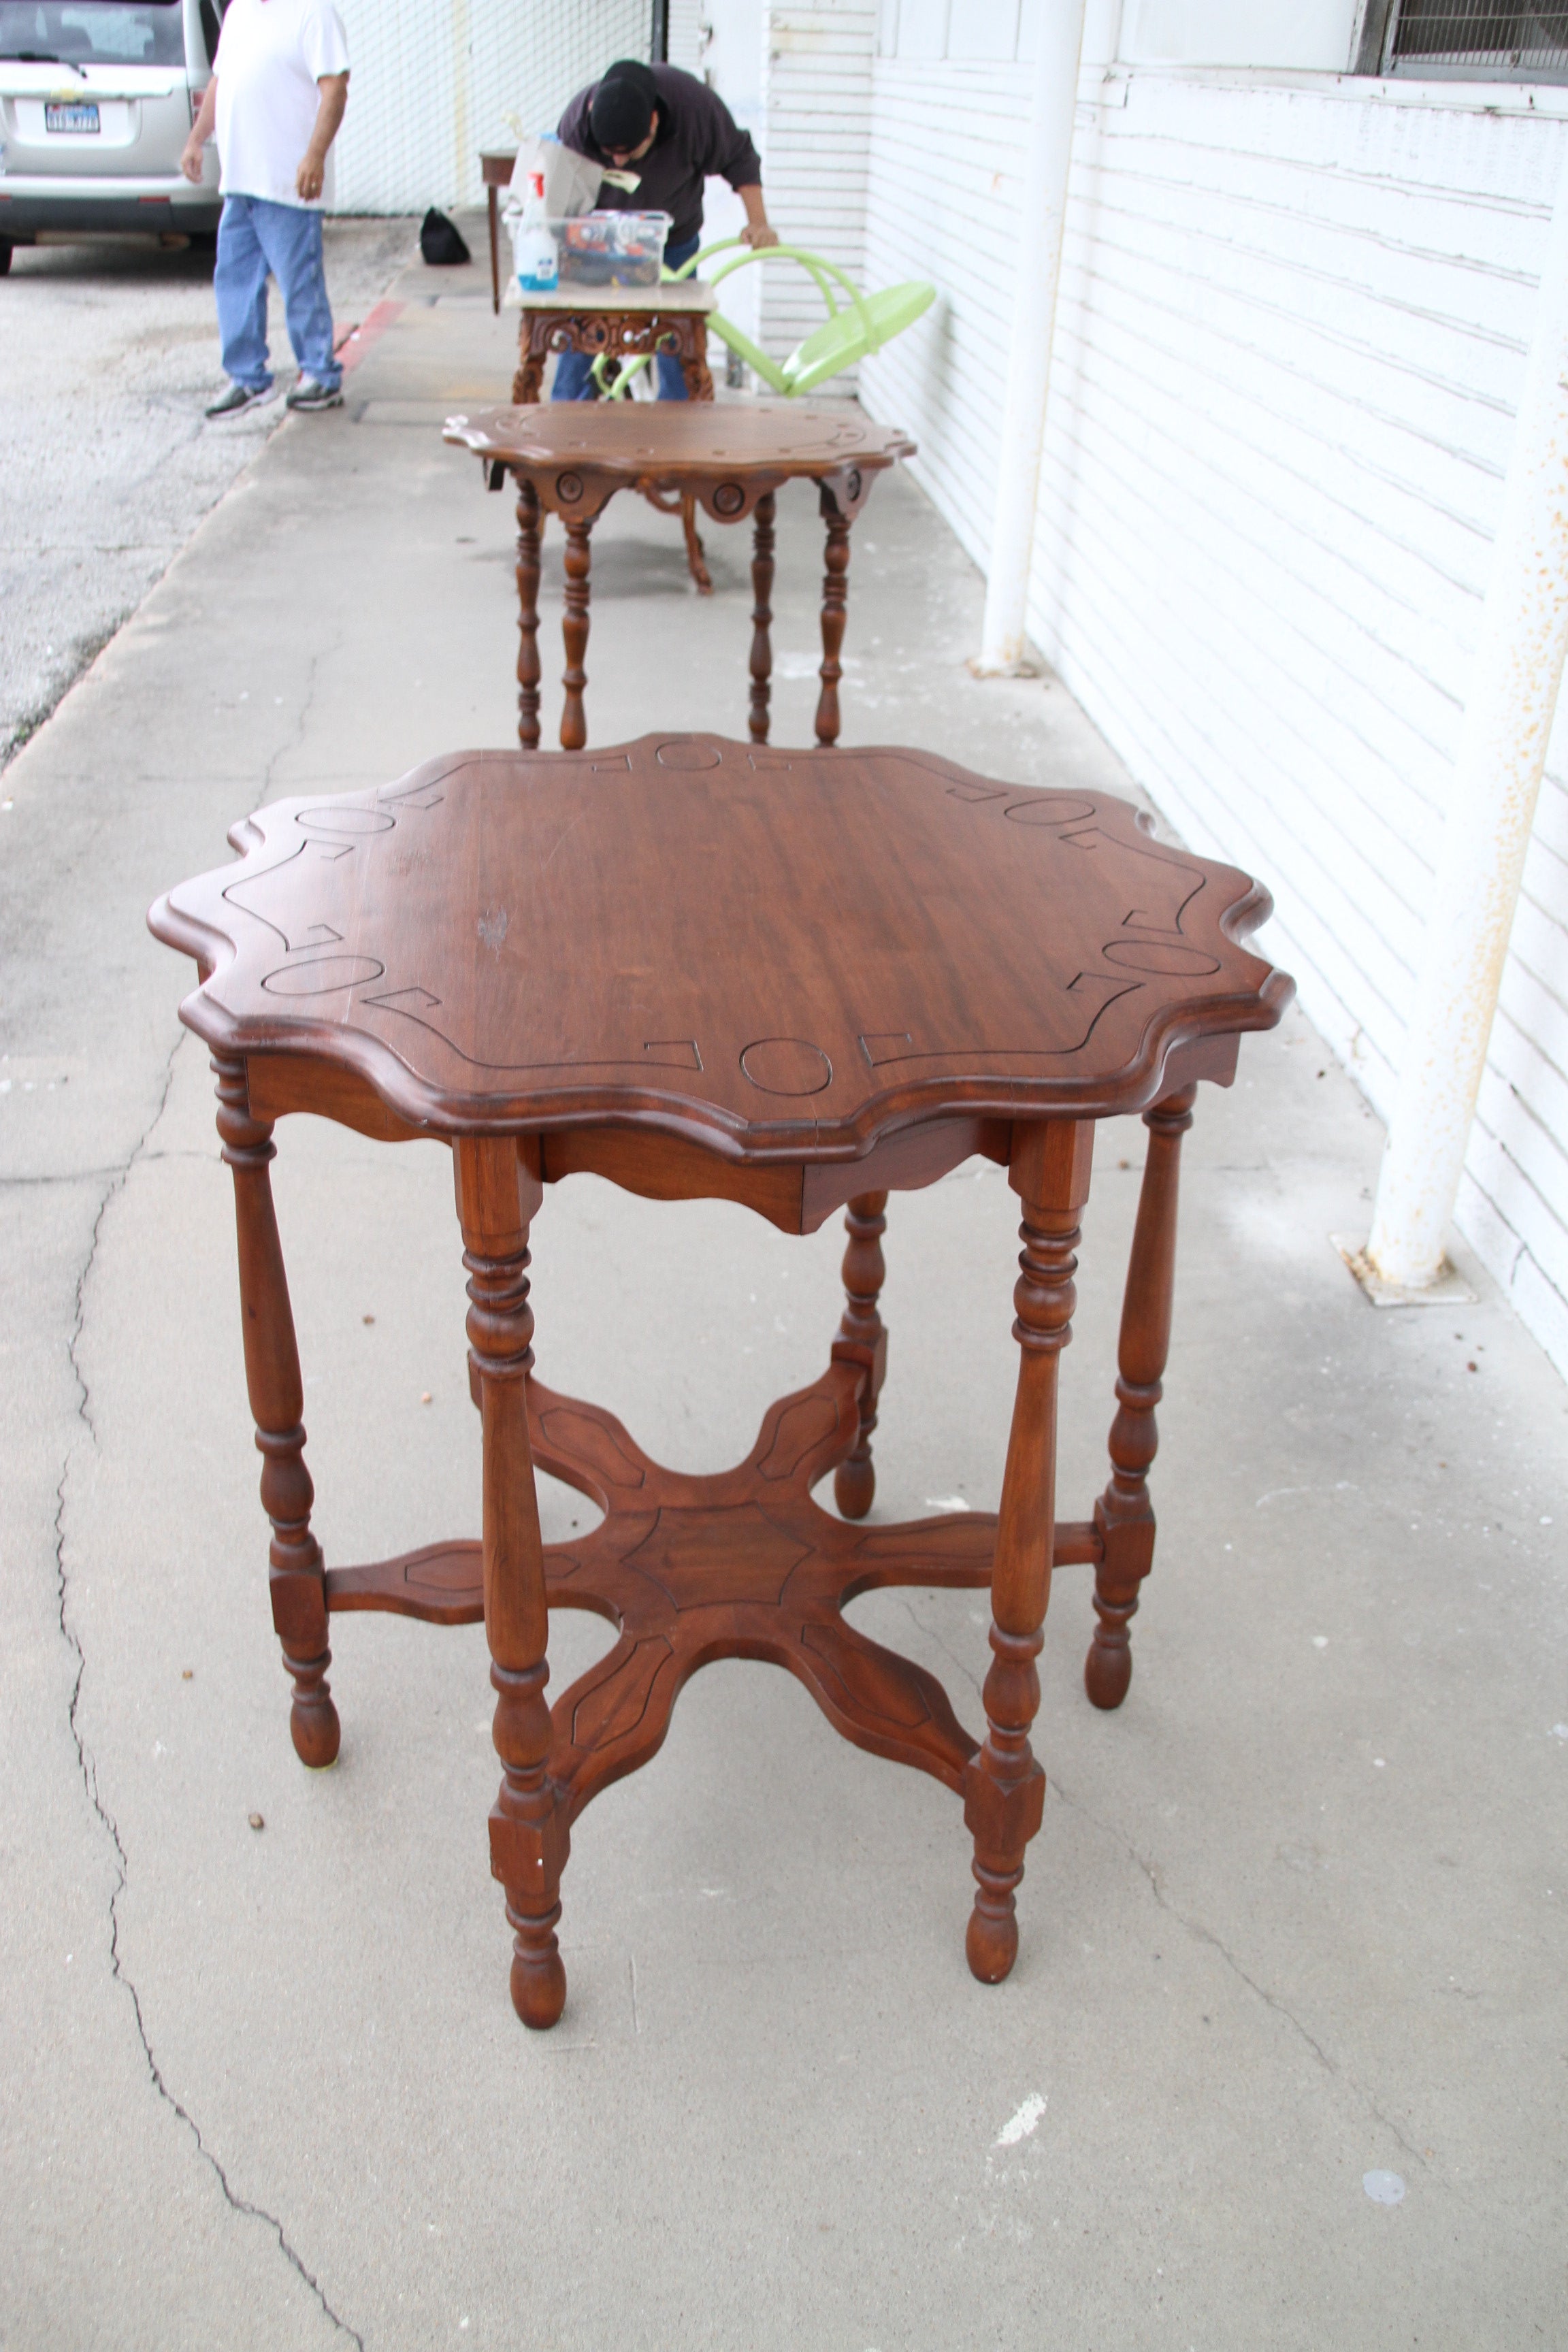 Vintage 6 Leg Scalloped Table

A stunning mid century modern mahogany foyer or side table. Features 6 turned legs and scalloped edges.